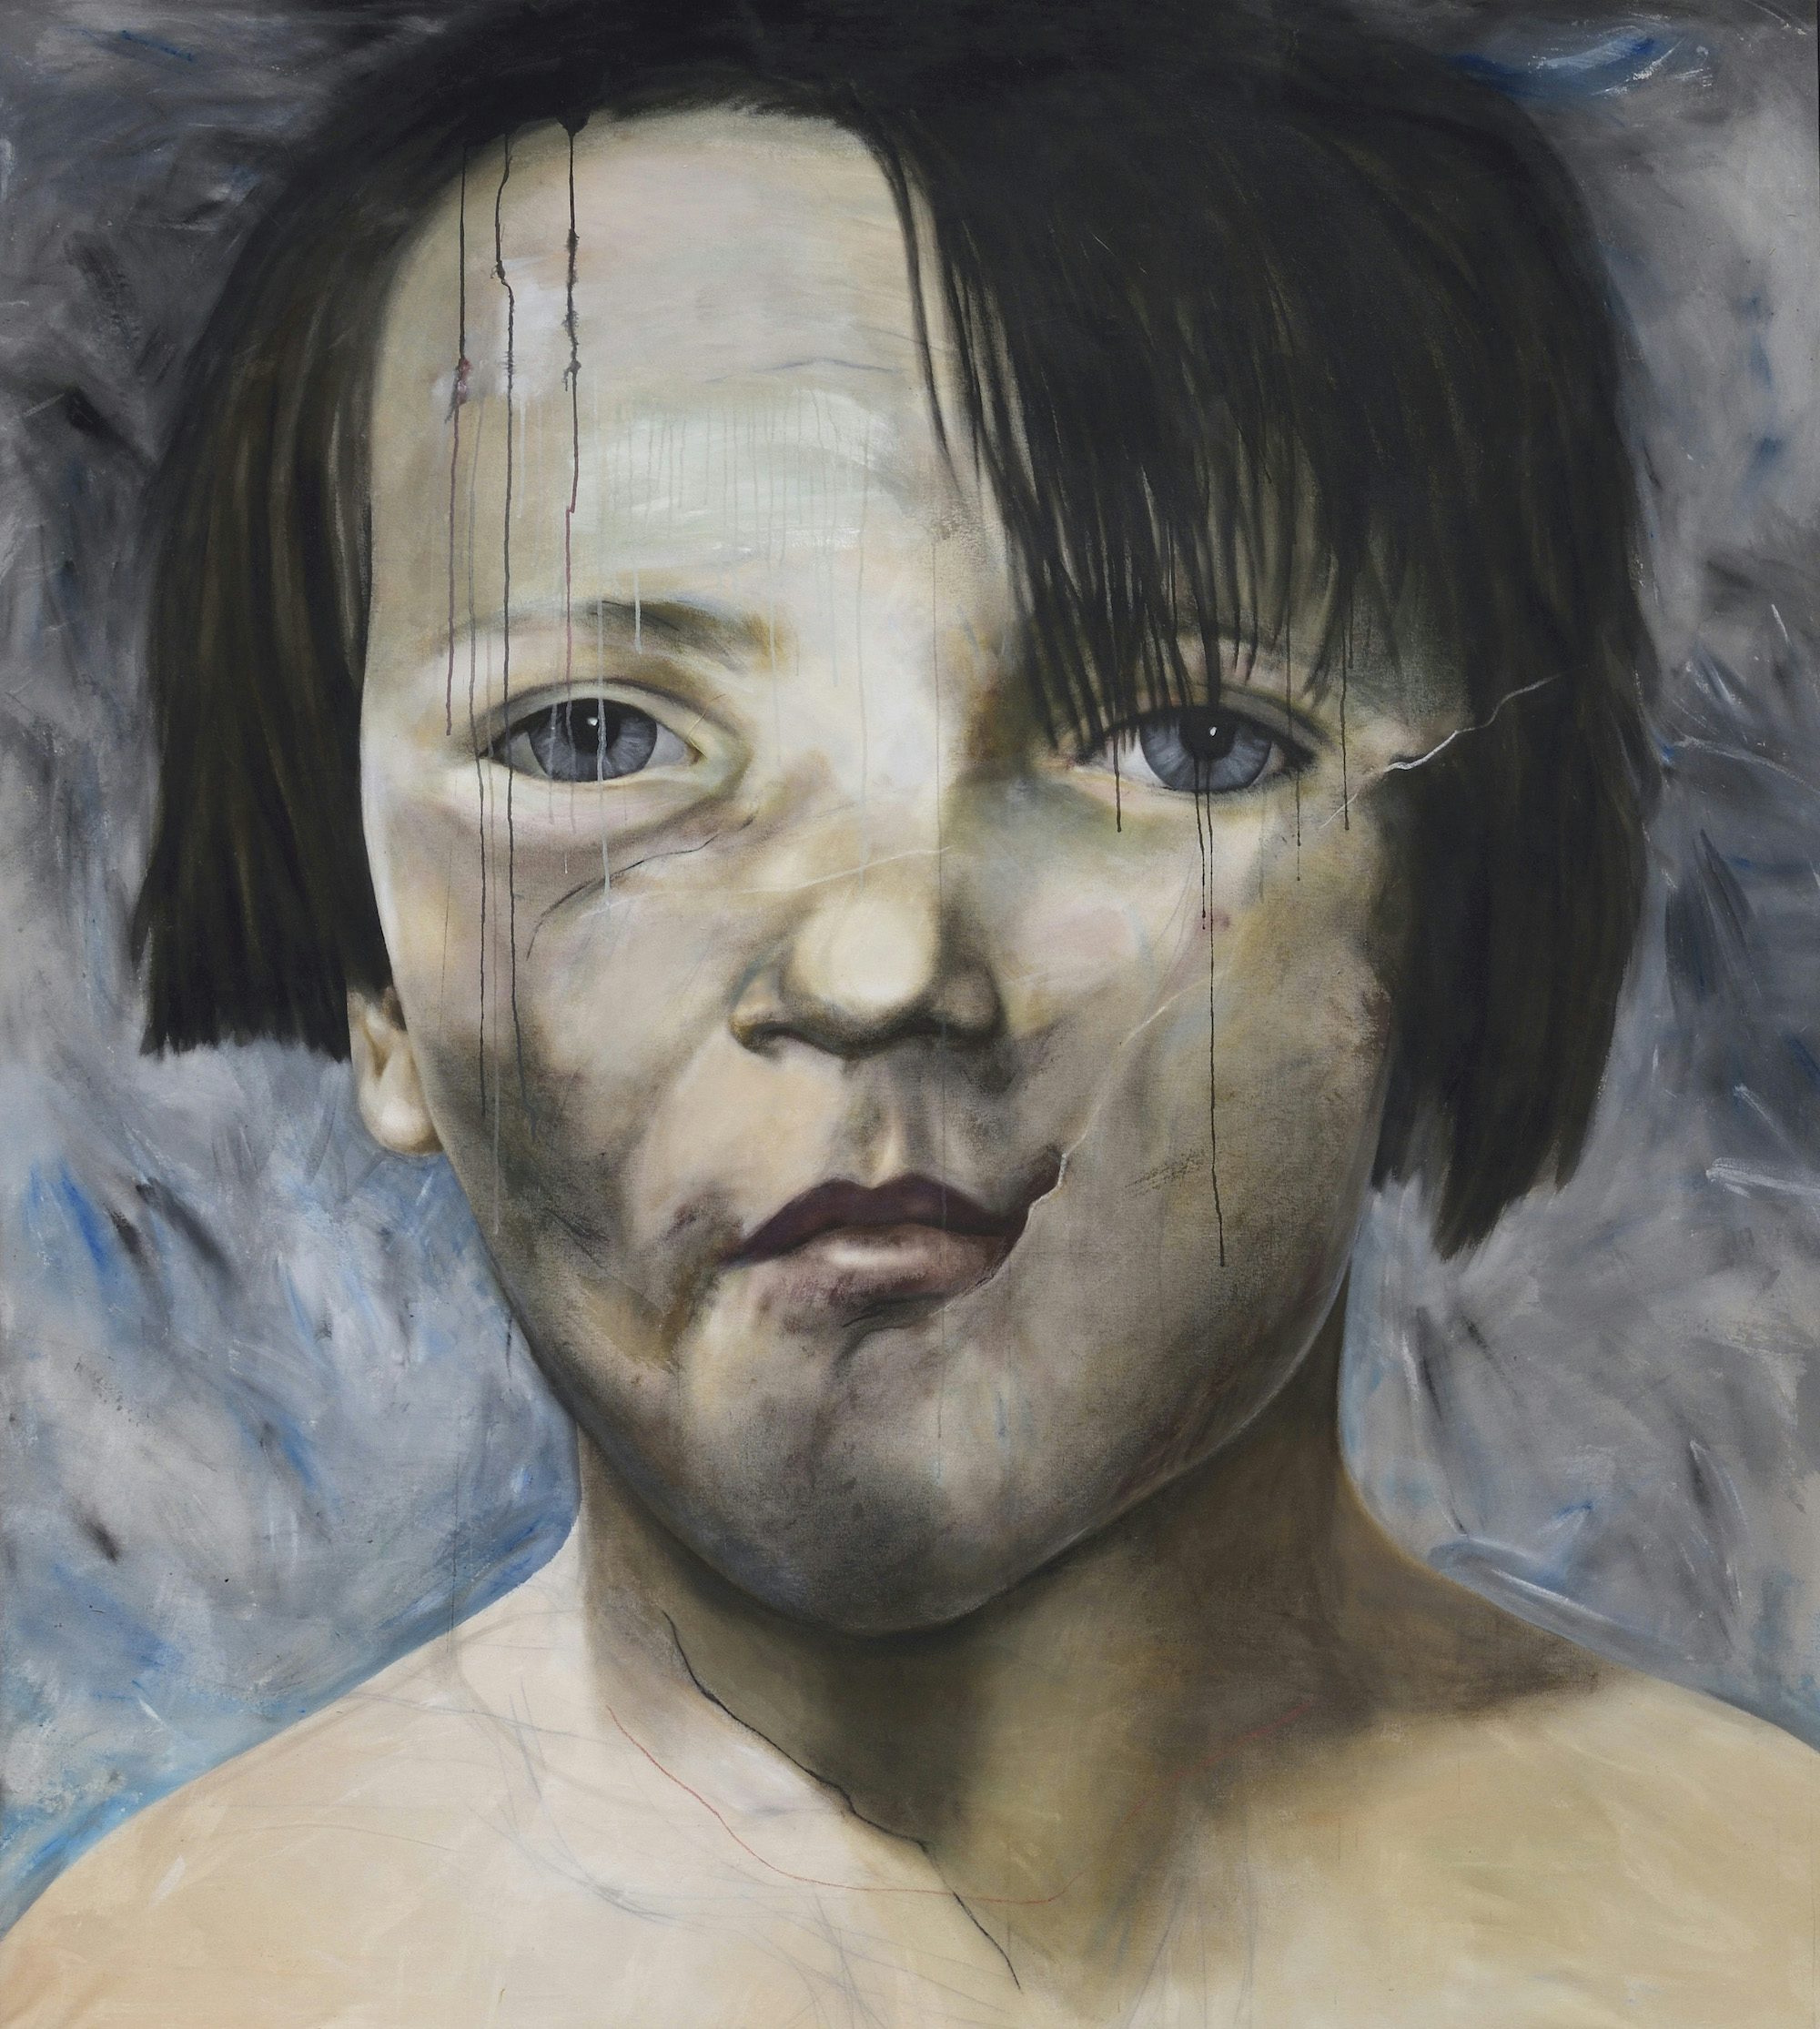 Gee Vaucher, Children Who Have Seen Too Much Too Soon, 2006-16